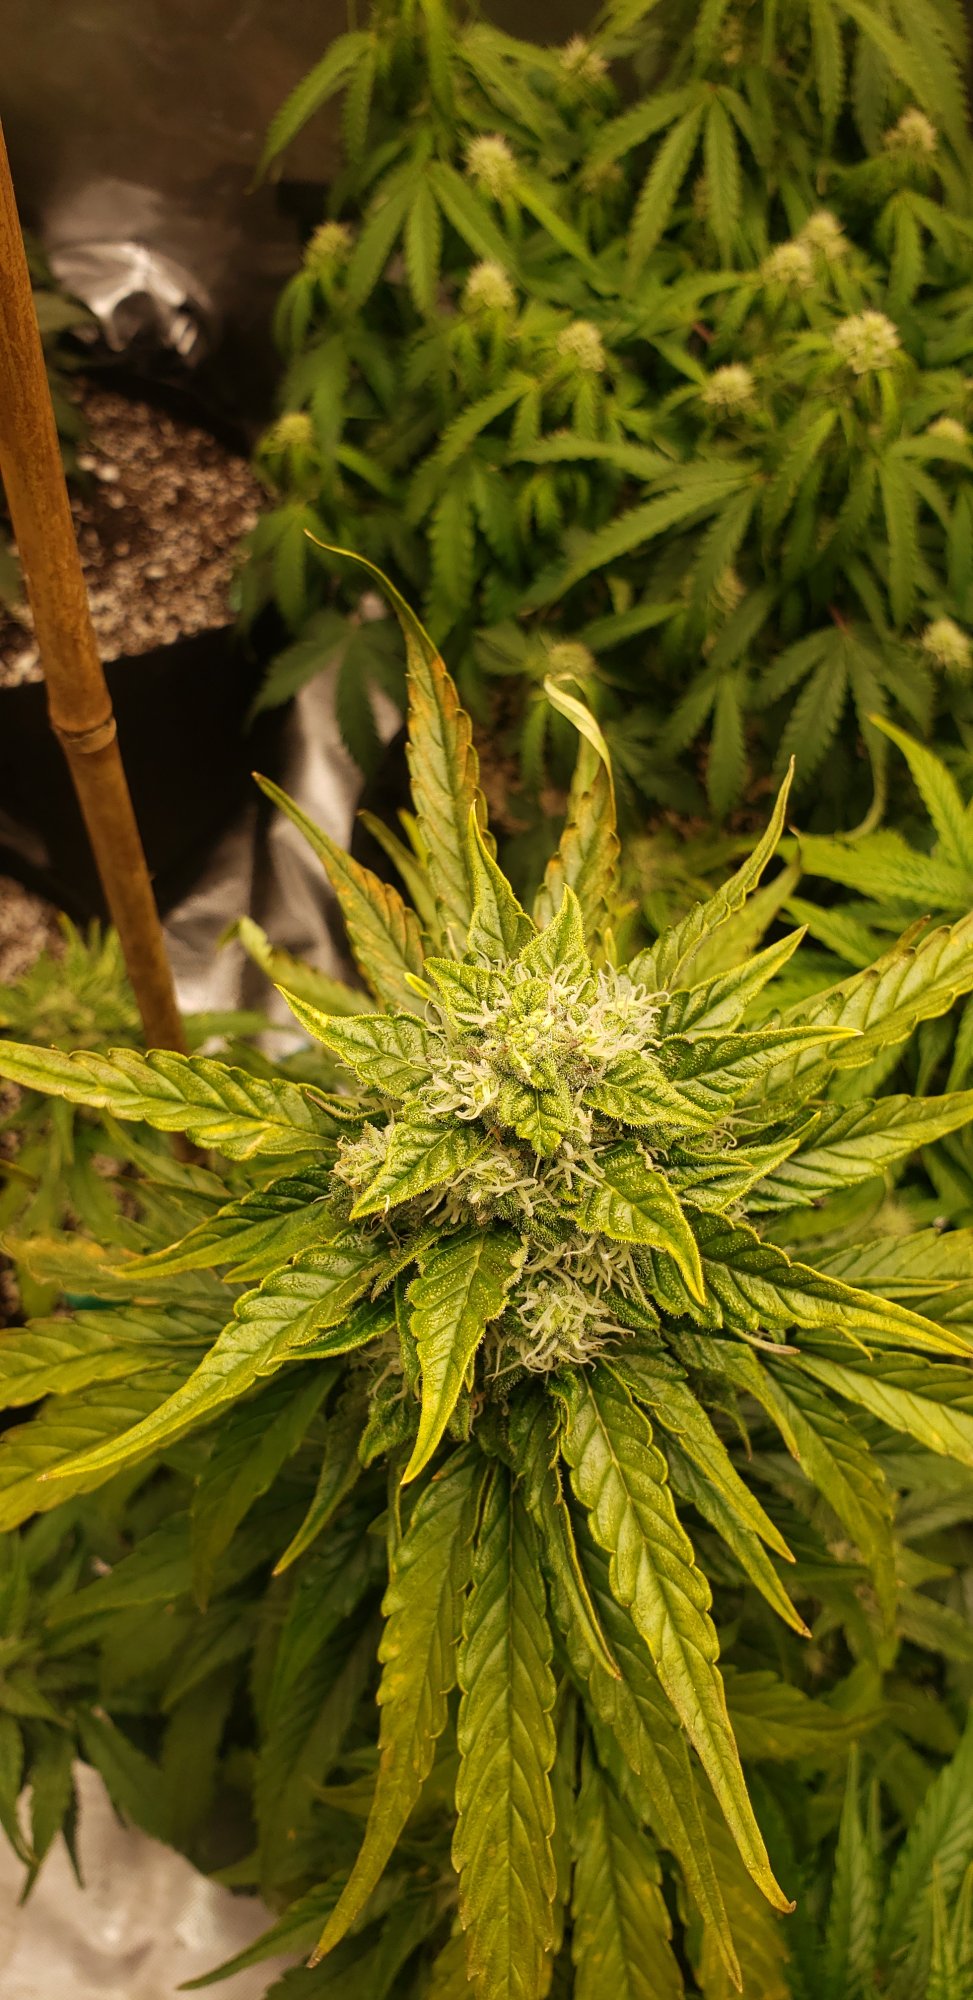 Need help diagnosing problem with my plant please